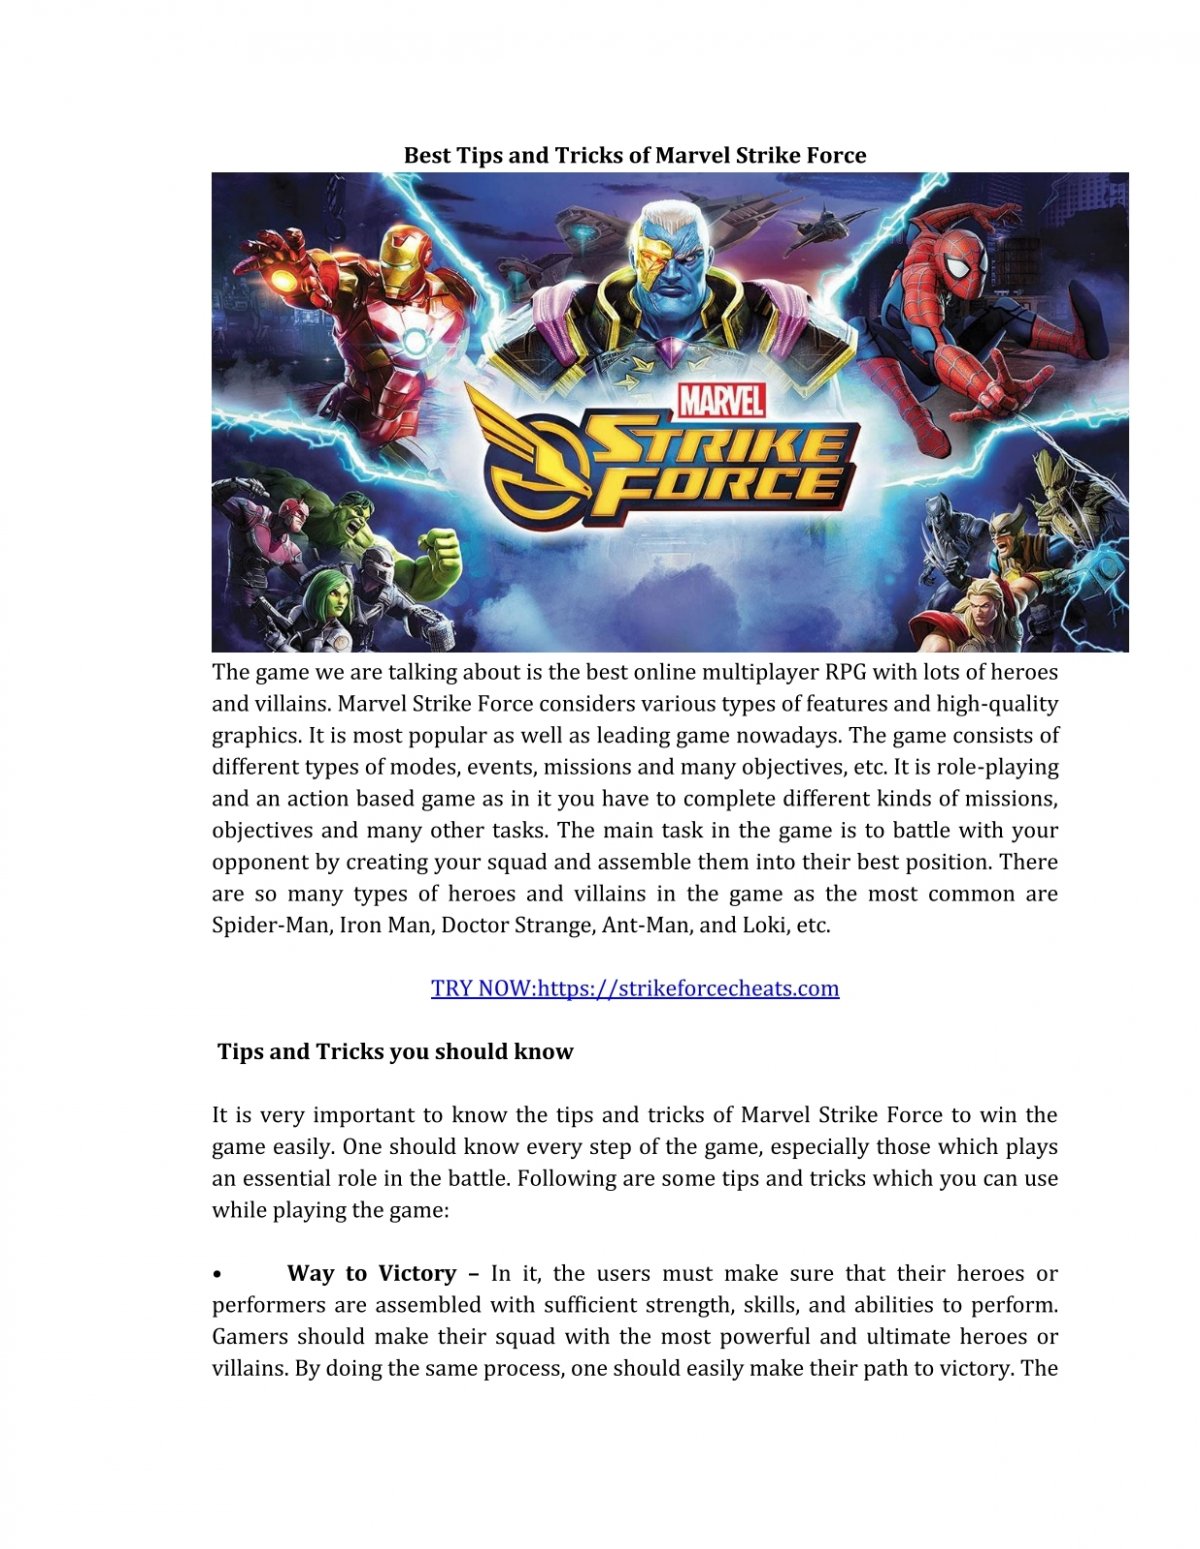 Marvel Strike Force Hack 2020 To Generate Gold and Power Core Easy